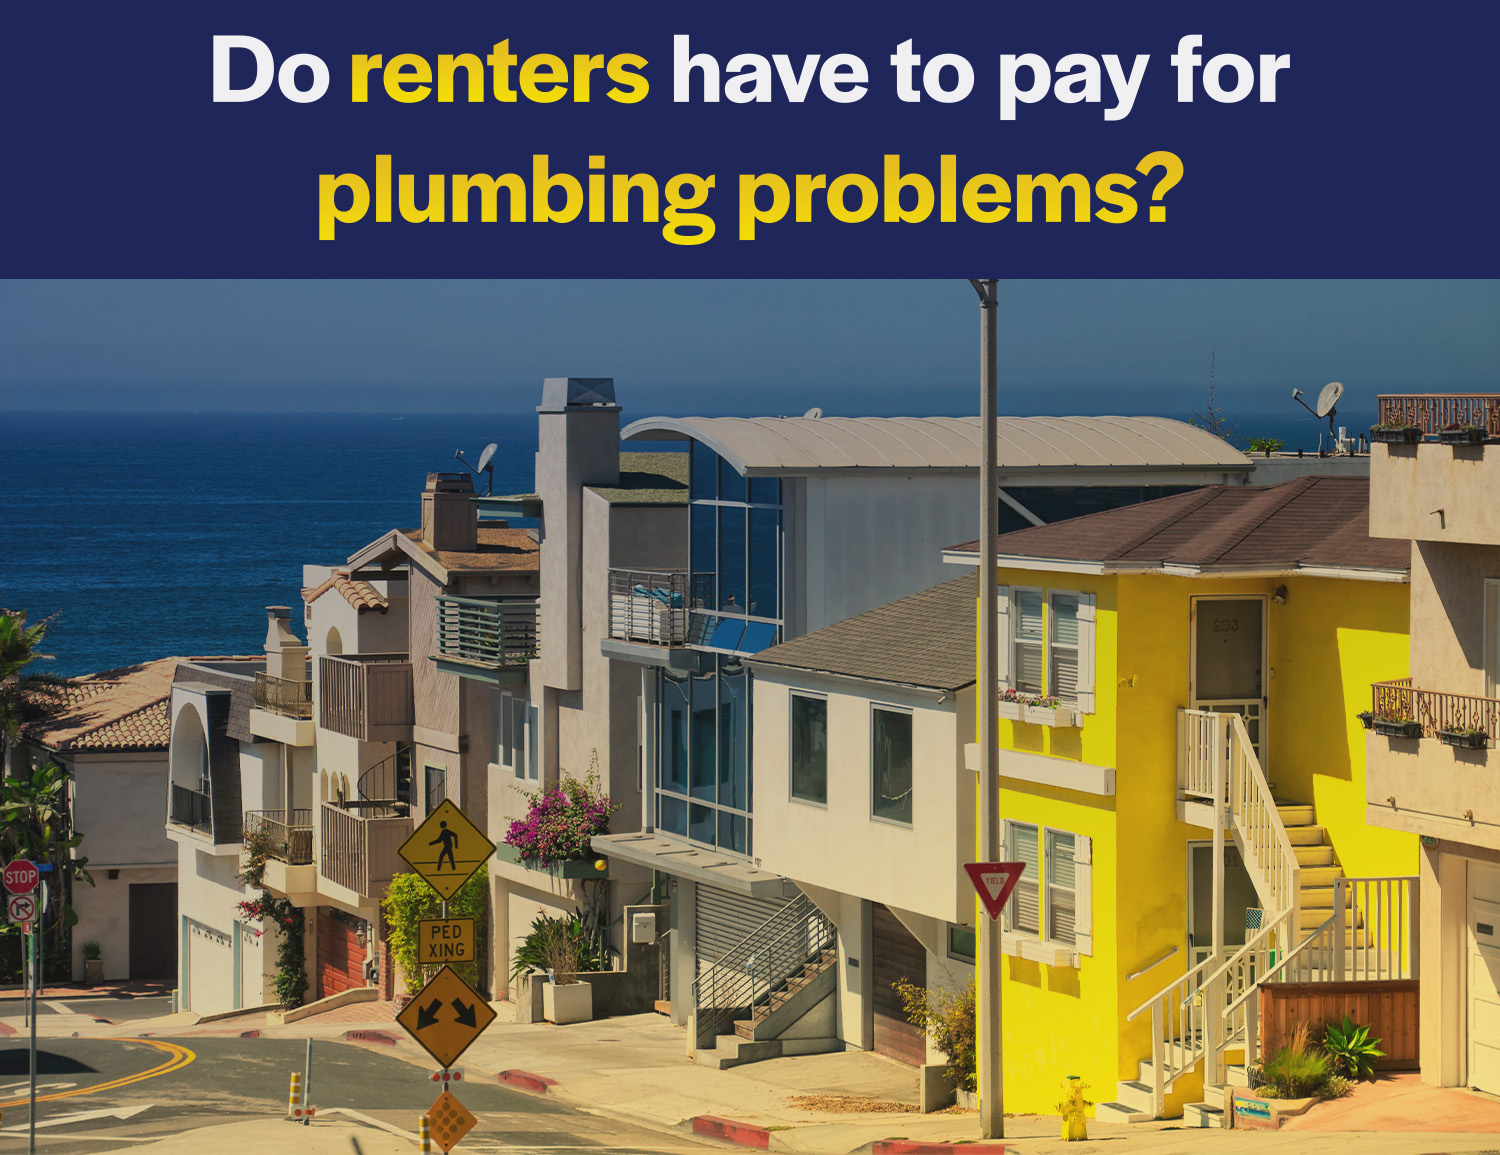 Do renters have to pay for plumbing problems?